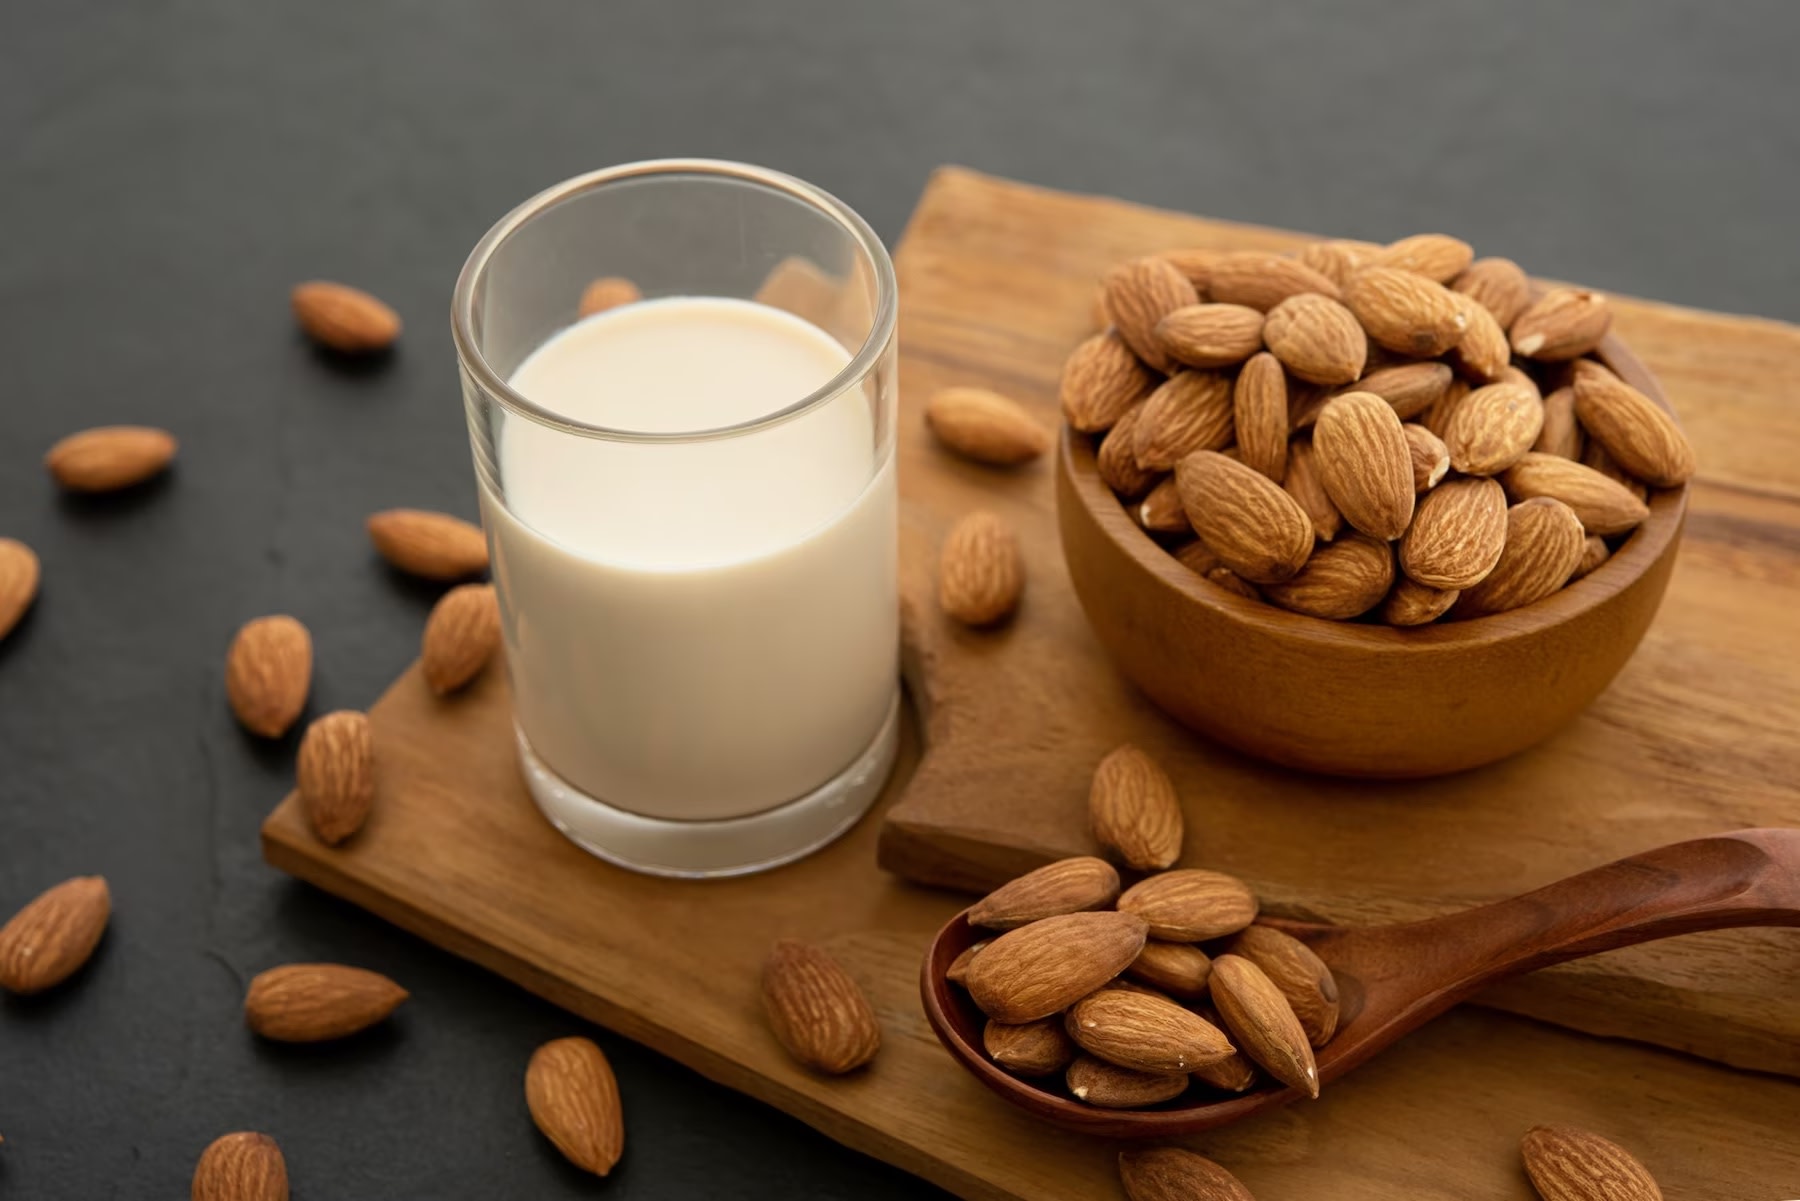 Image of glass of almond milk with bowl and spoon of whole almonds